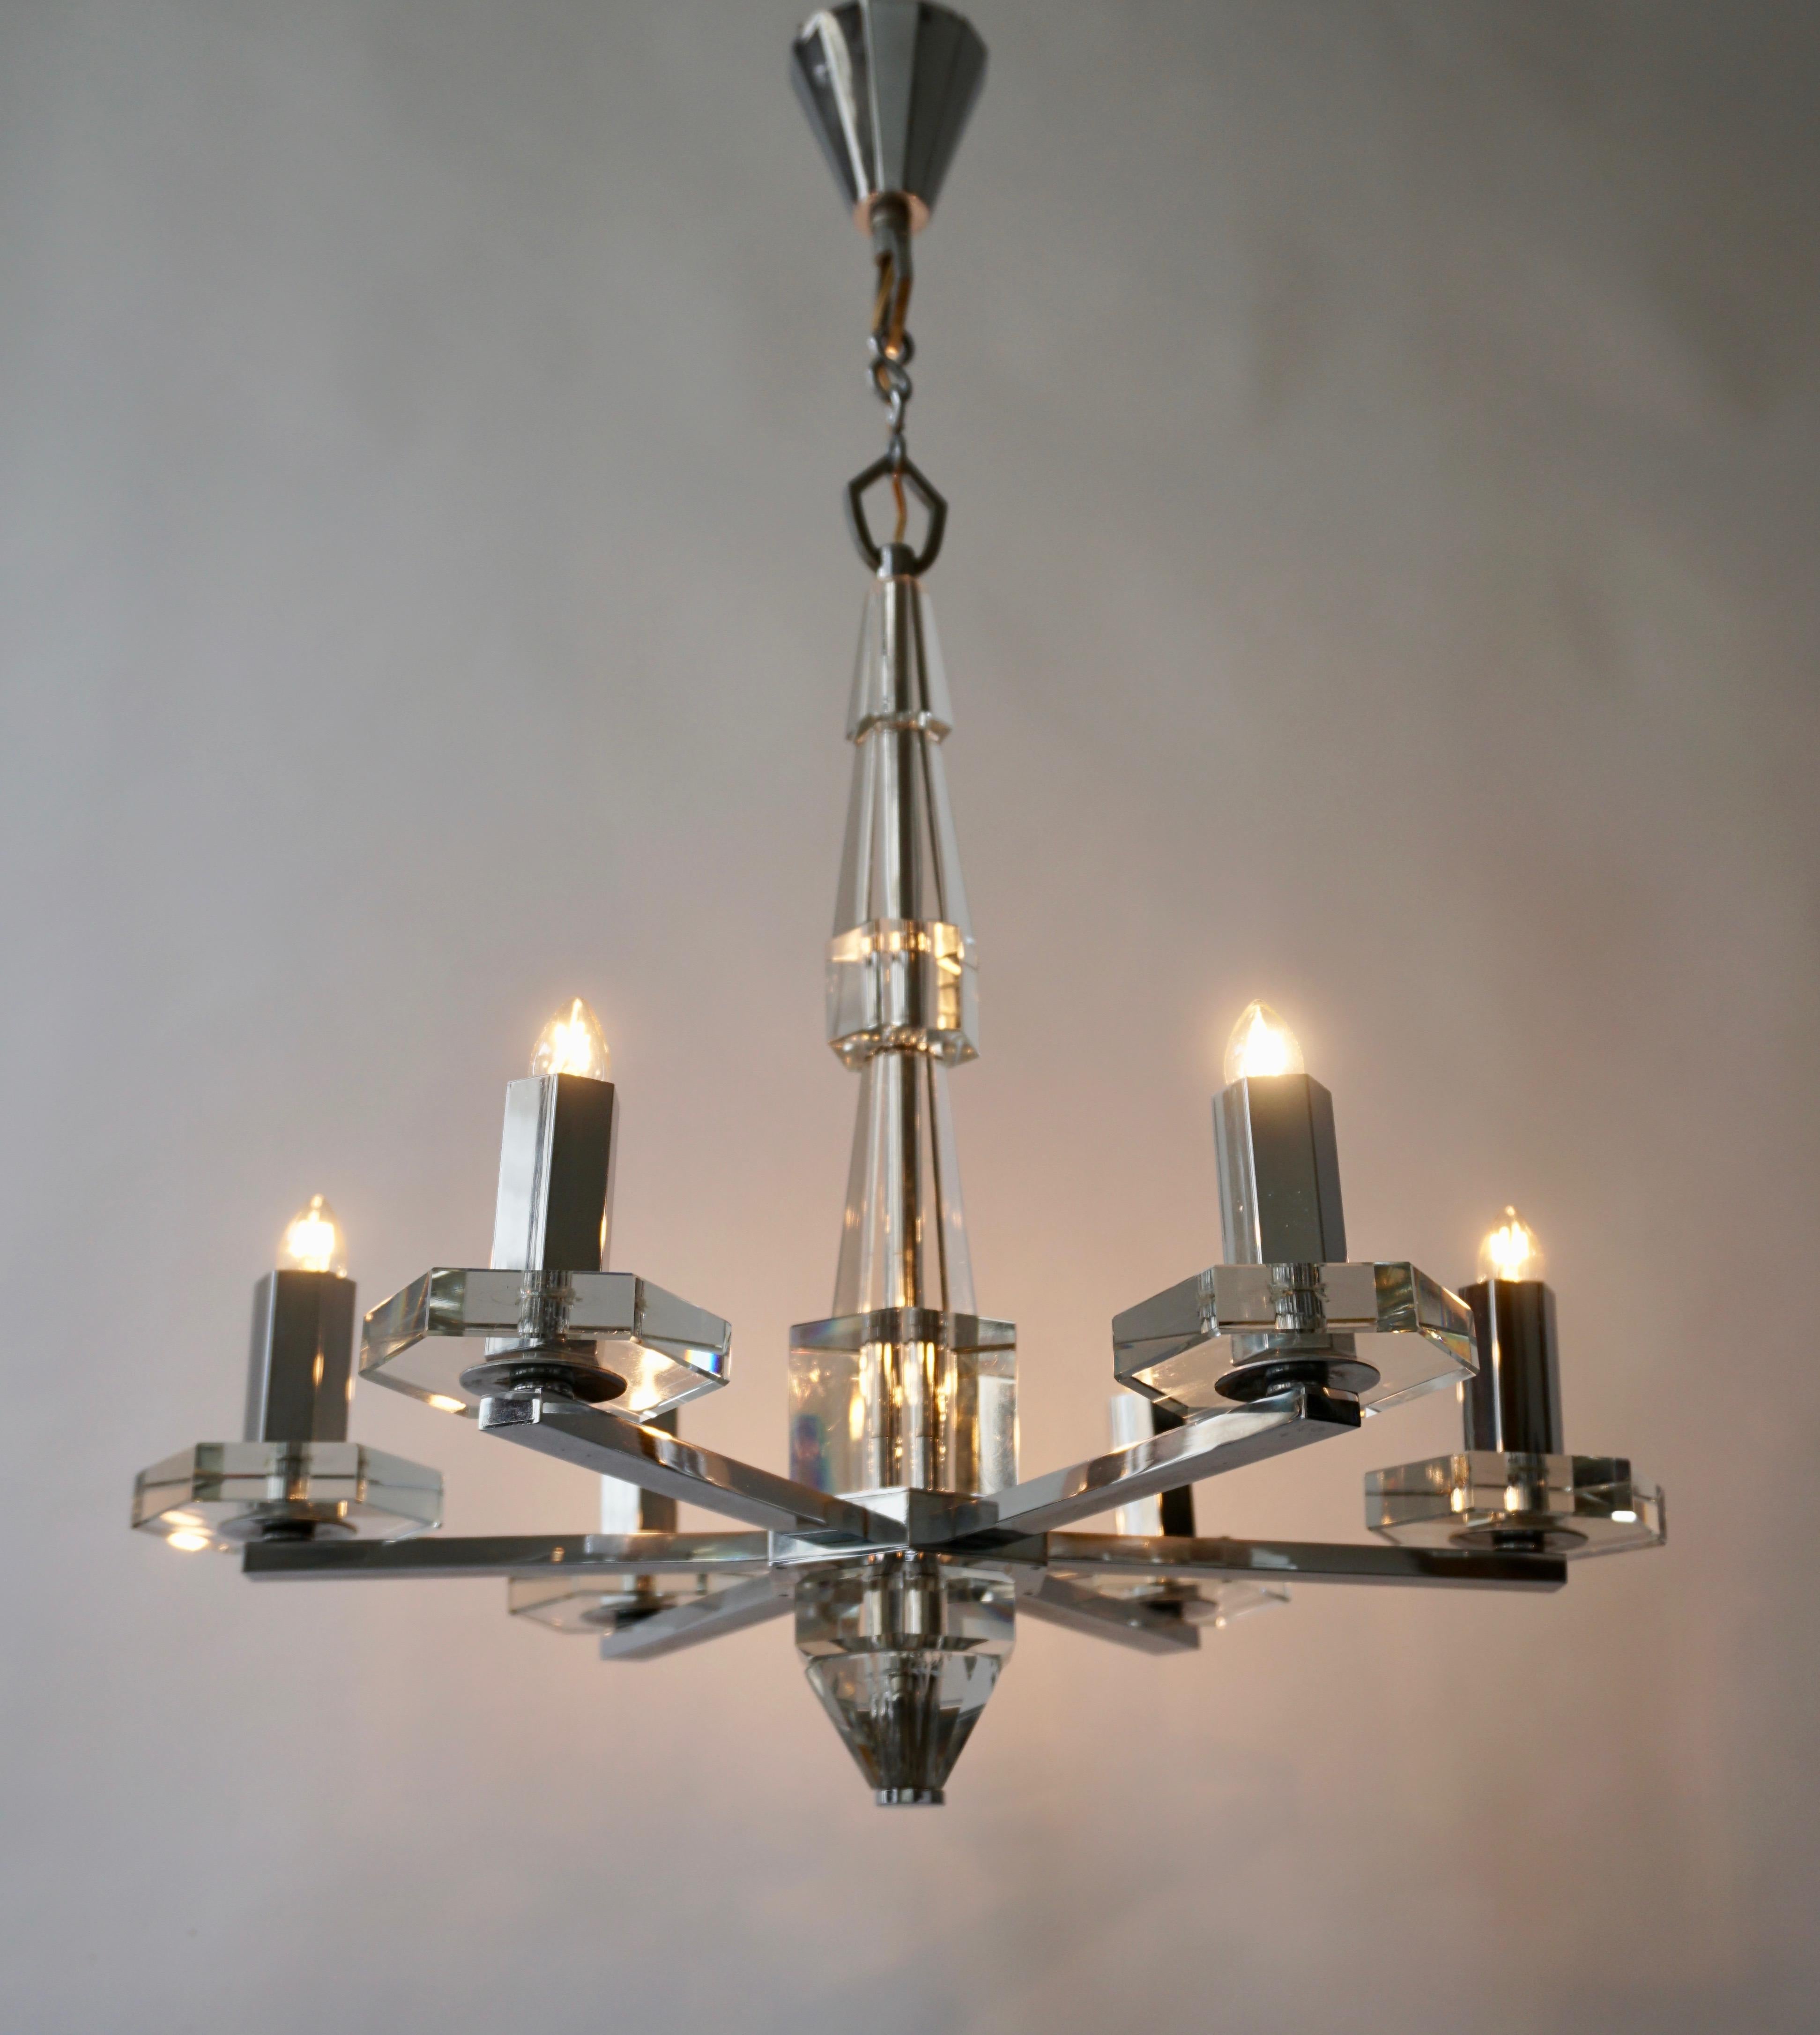 Precious faceted crystal glass Art Deco chandelier. The beautiful chandelier takes six E14 standard screw bulbs to illuminate. The wiring is very good so it is in fine working order and ready to use. The total length is about 70 cm, and it has a